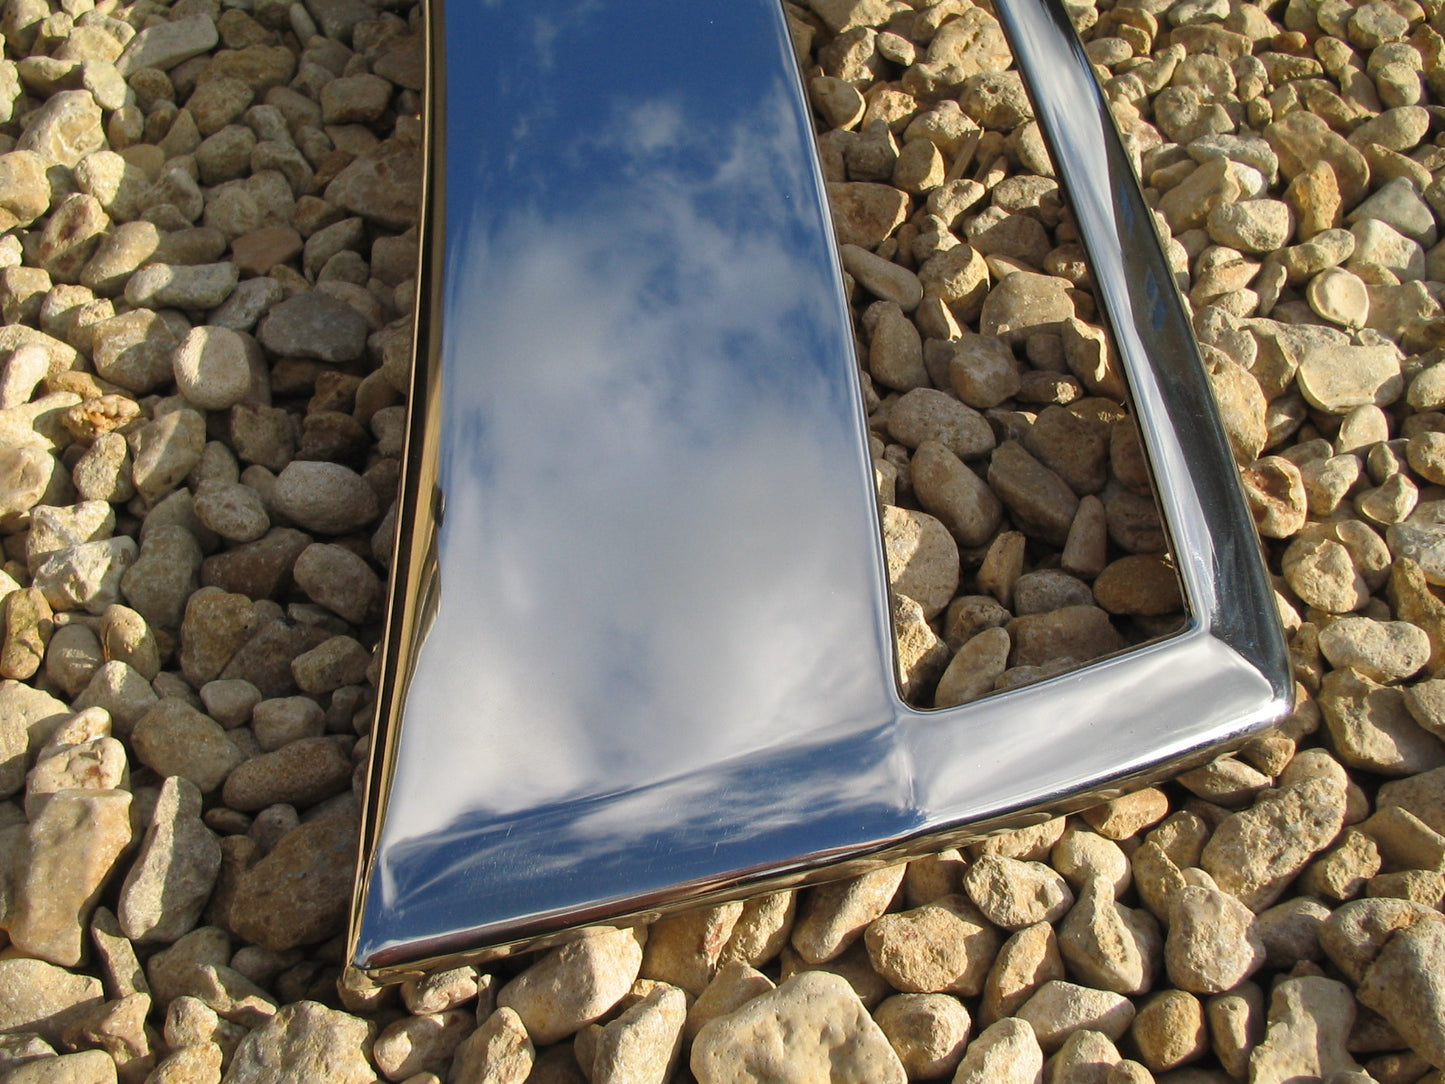 Bonnet Vent Cover - Polished Stainless for Range Rover L322